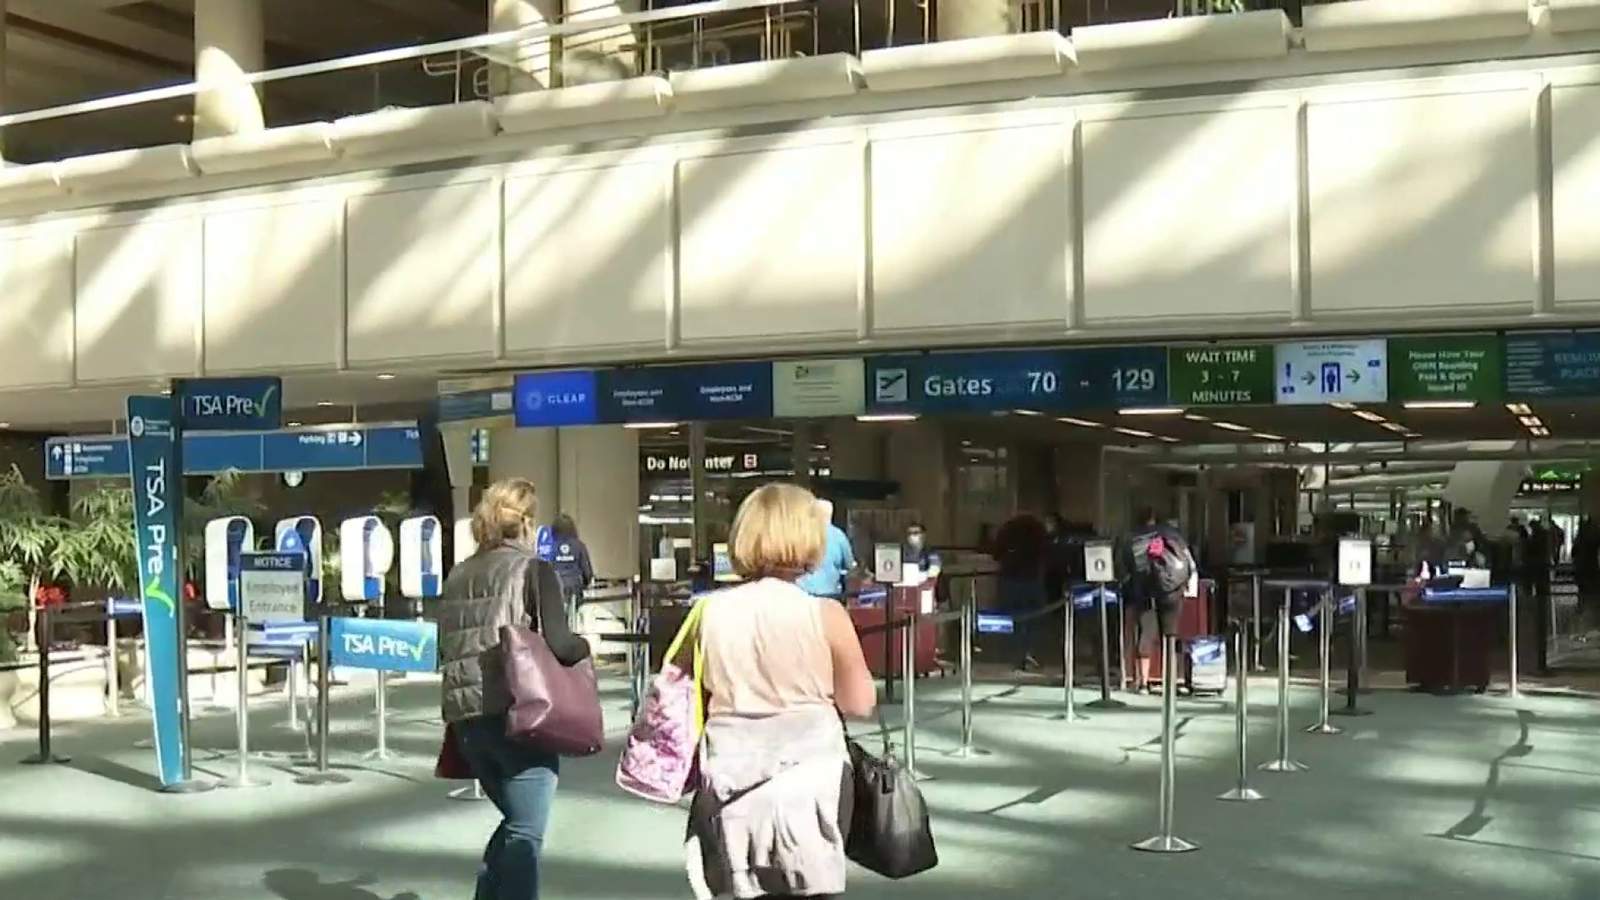 Orlando airport saw more than 57% reduction in passengers in 2020, report says